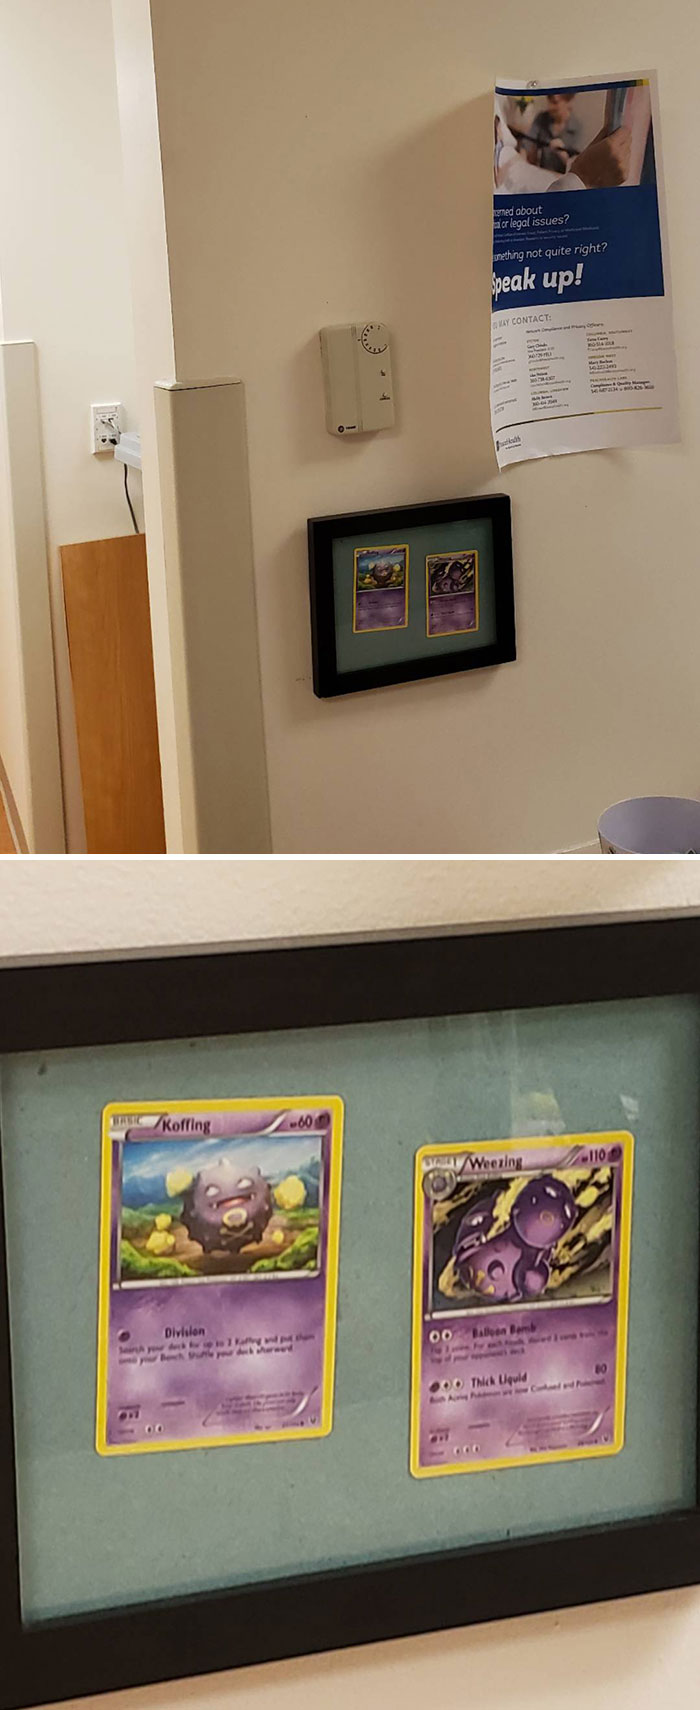 The Asthma Ward Of My Local Medical Center Has Koffing And Weezing Pokémon Cards Framed